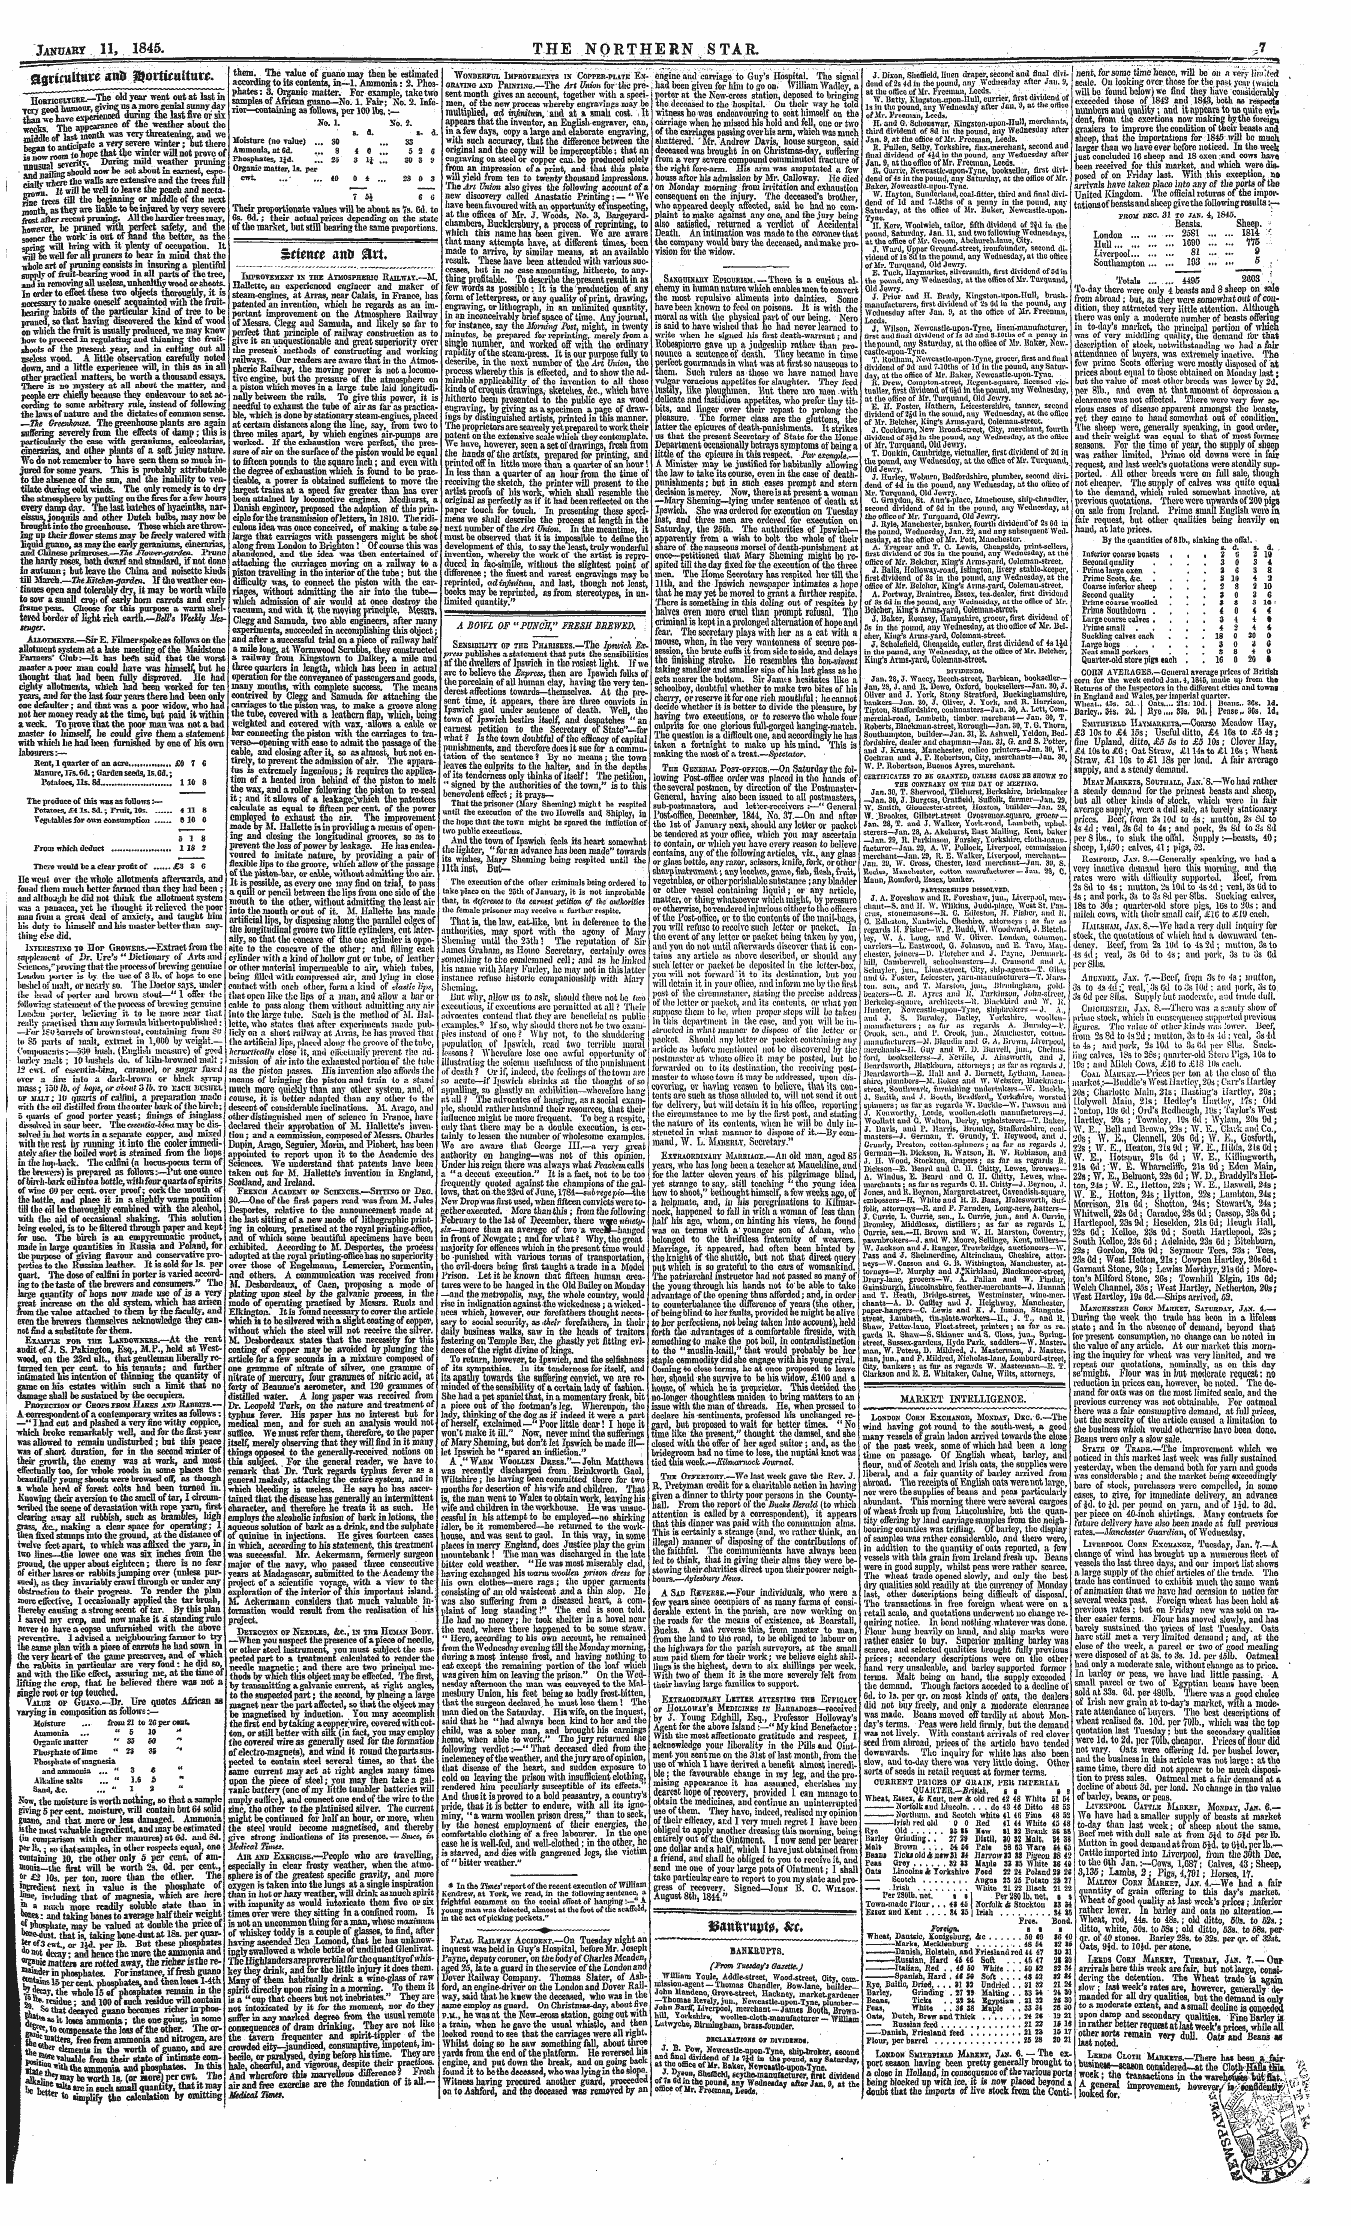 Northern Star (1837-1852): jS F Y, 2nd edition - Bankrupts. (From Tuesday's Gazette. J "W...